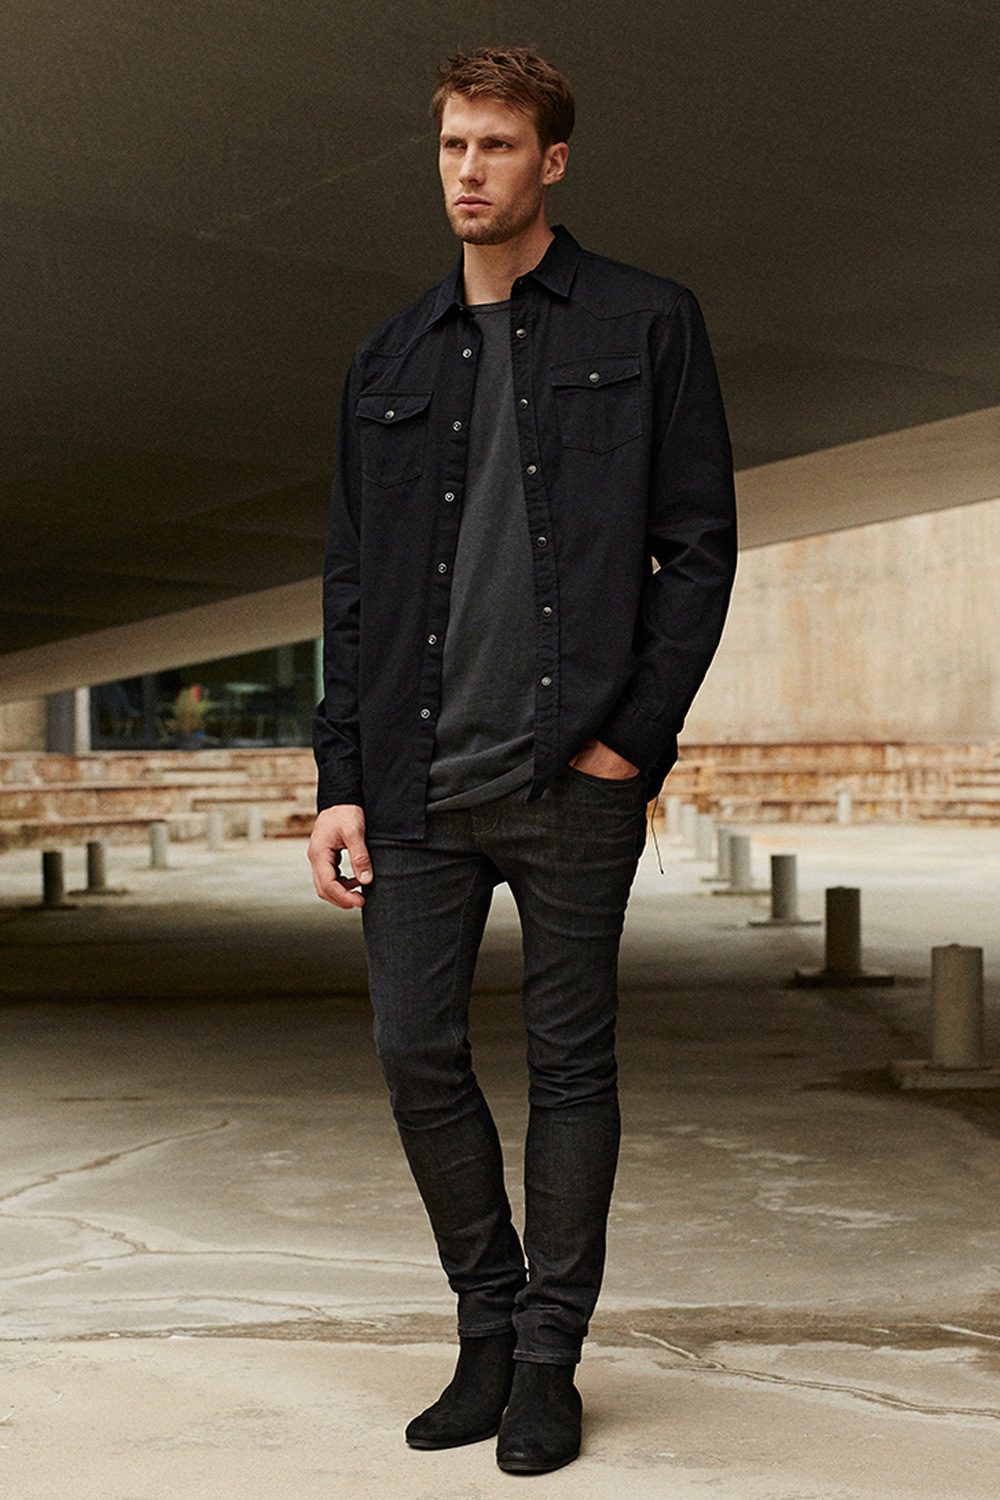 Top 5 Ways To Wear Boots With Jeans For Men